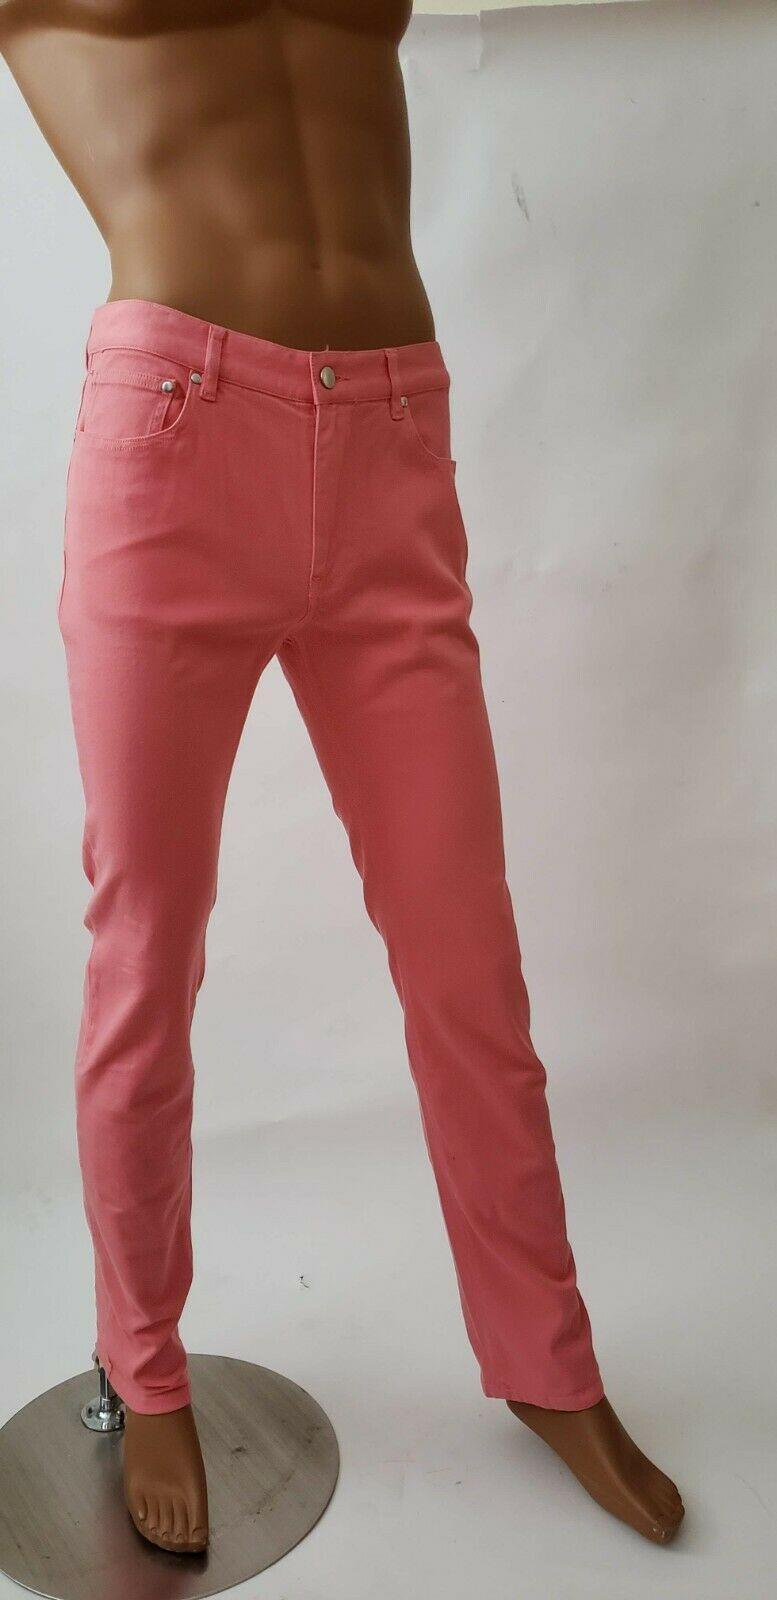 VILEBREQUIN  Men's Classic Slim Straight Fit Jeans Coral  Size 54 - SVNYFancy